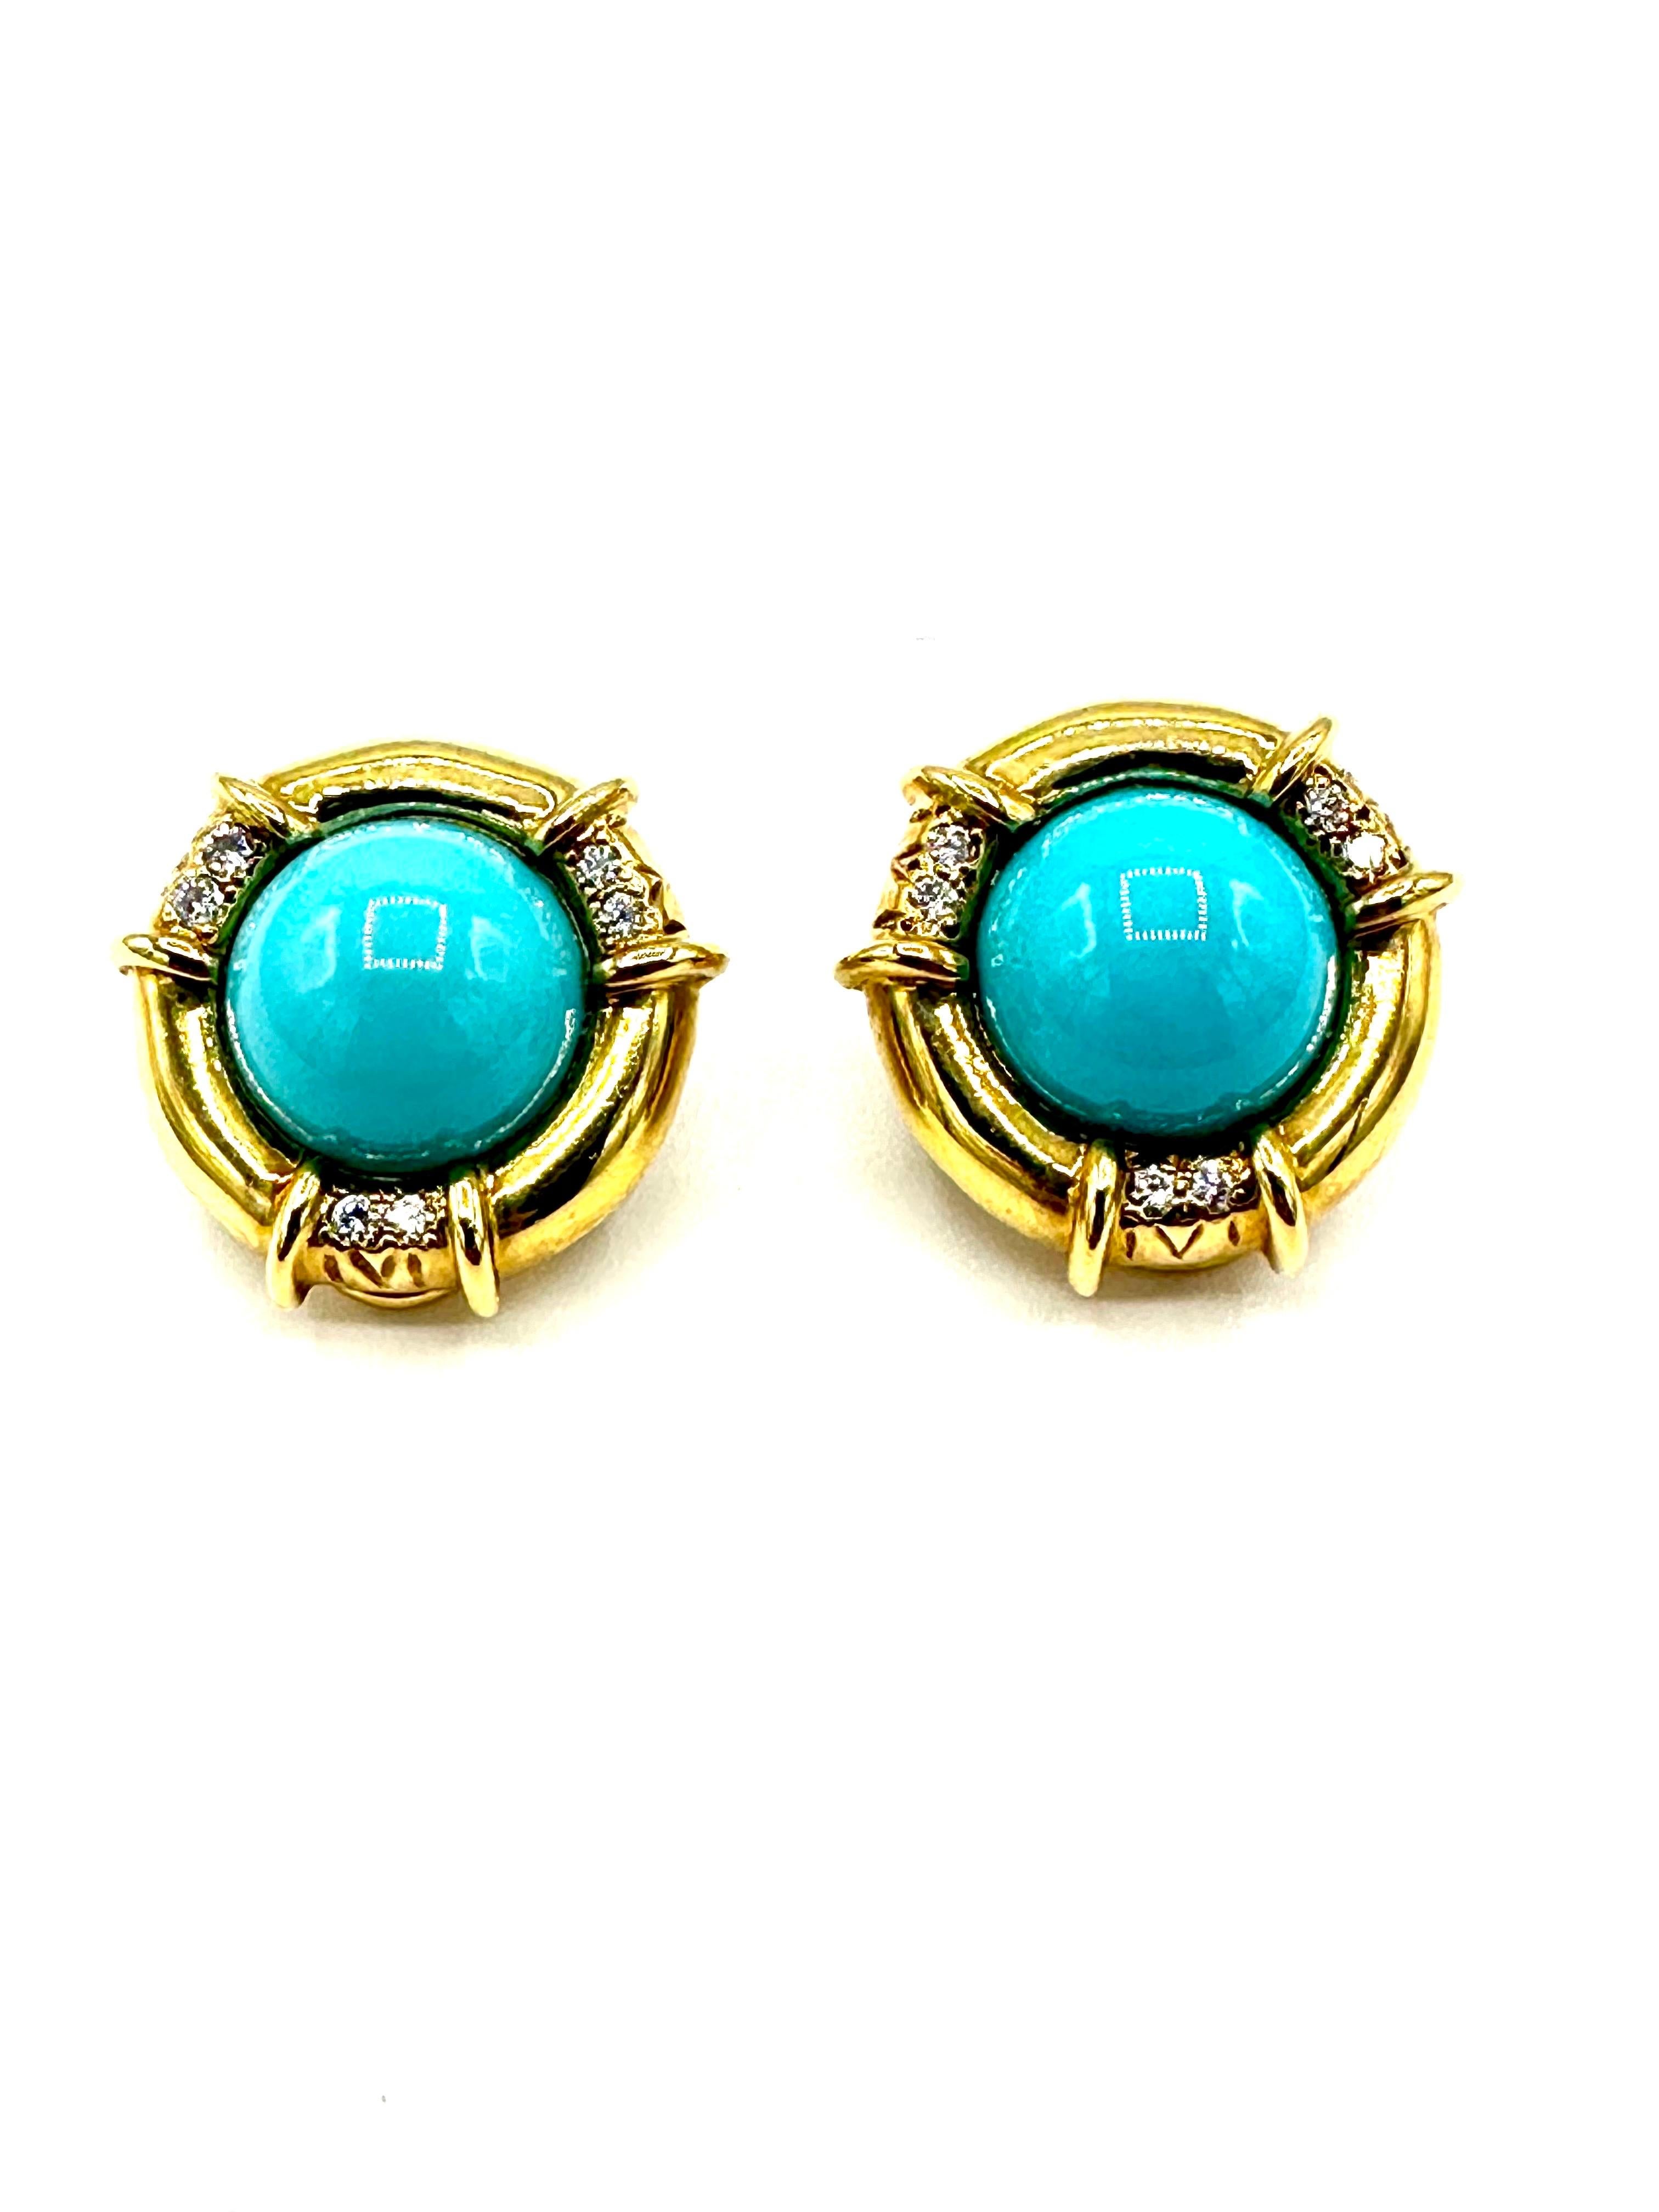 Tiffany & Co. Cabochon Turquoise and Diamond 18K Yellow Gold Clip Earrings For Sale 1